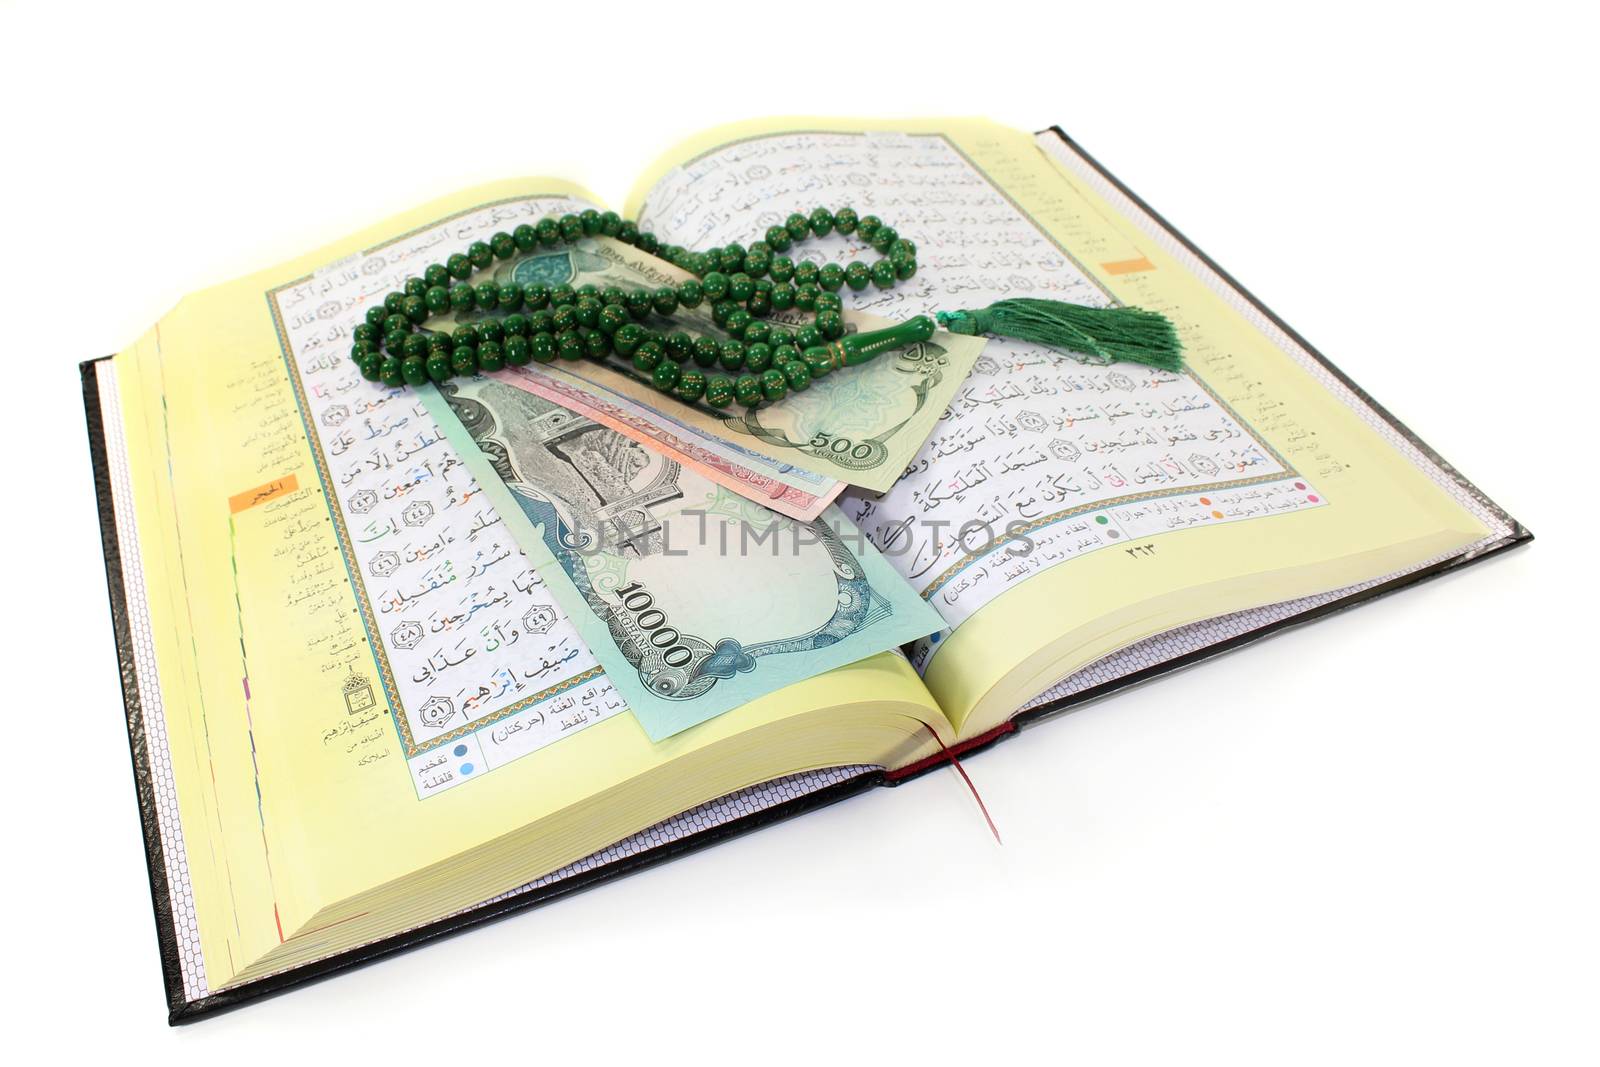 Koran with Afghan banknotes in front of white background